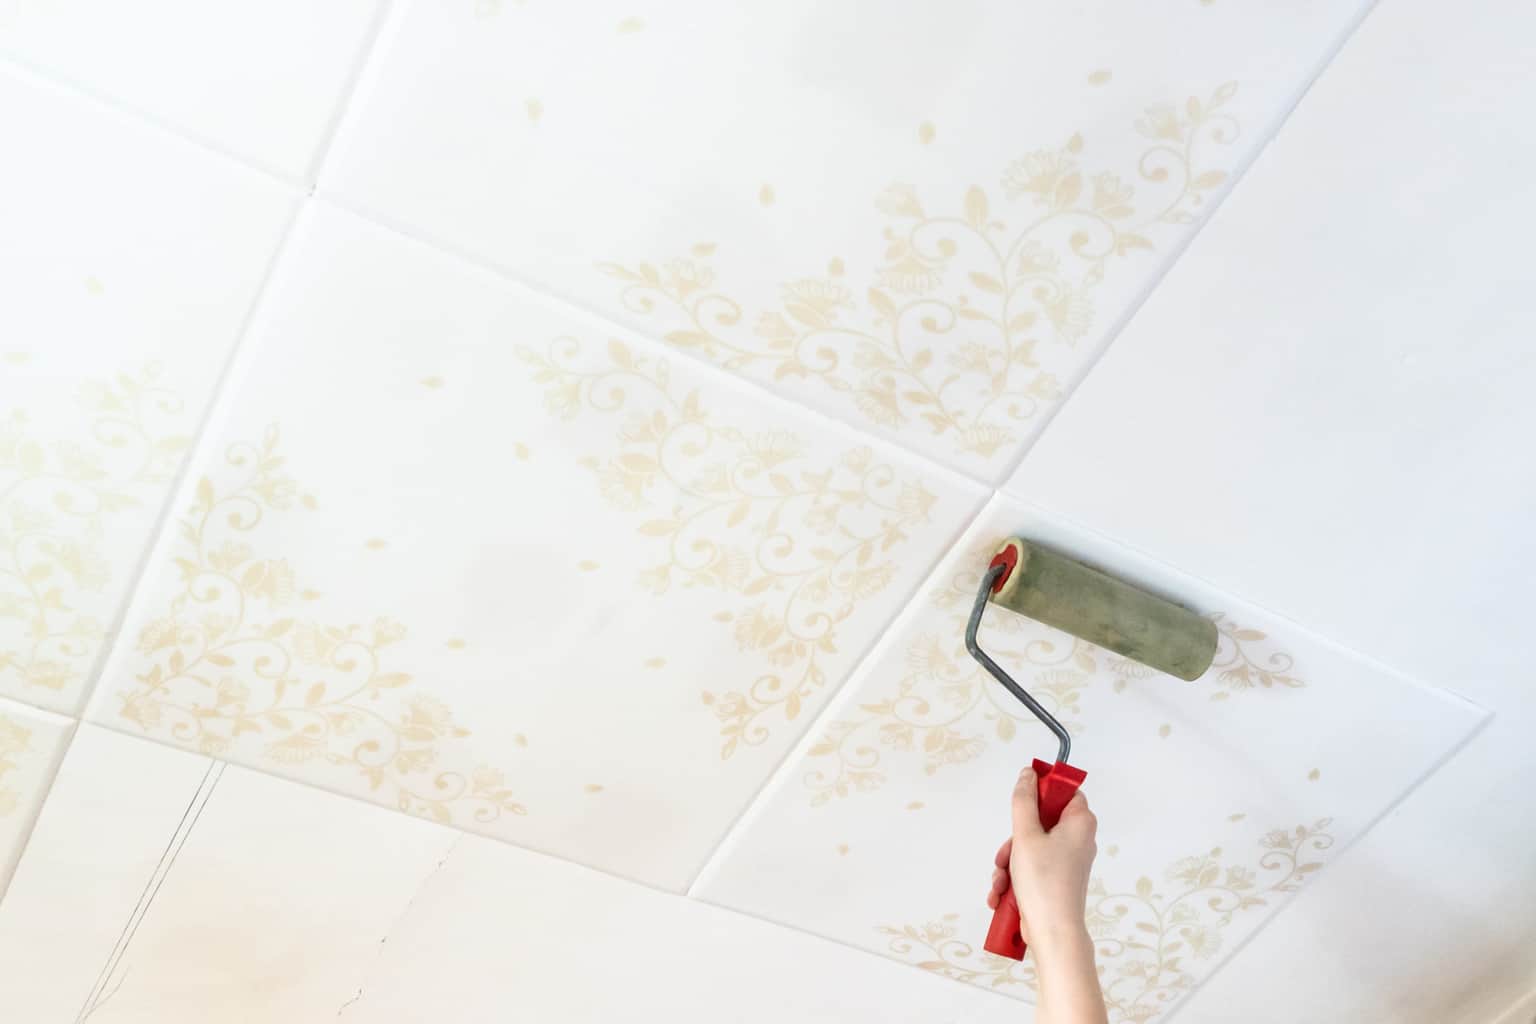 Painting - how to use tile paint?